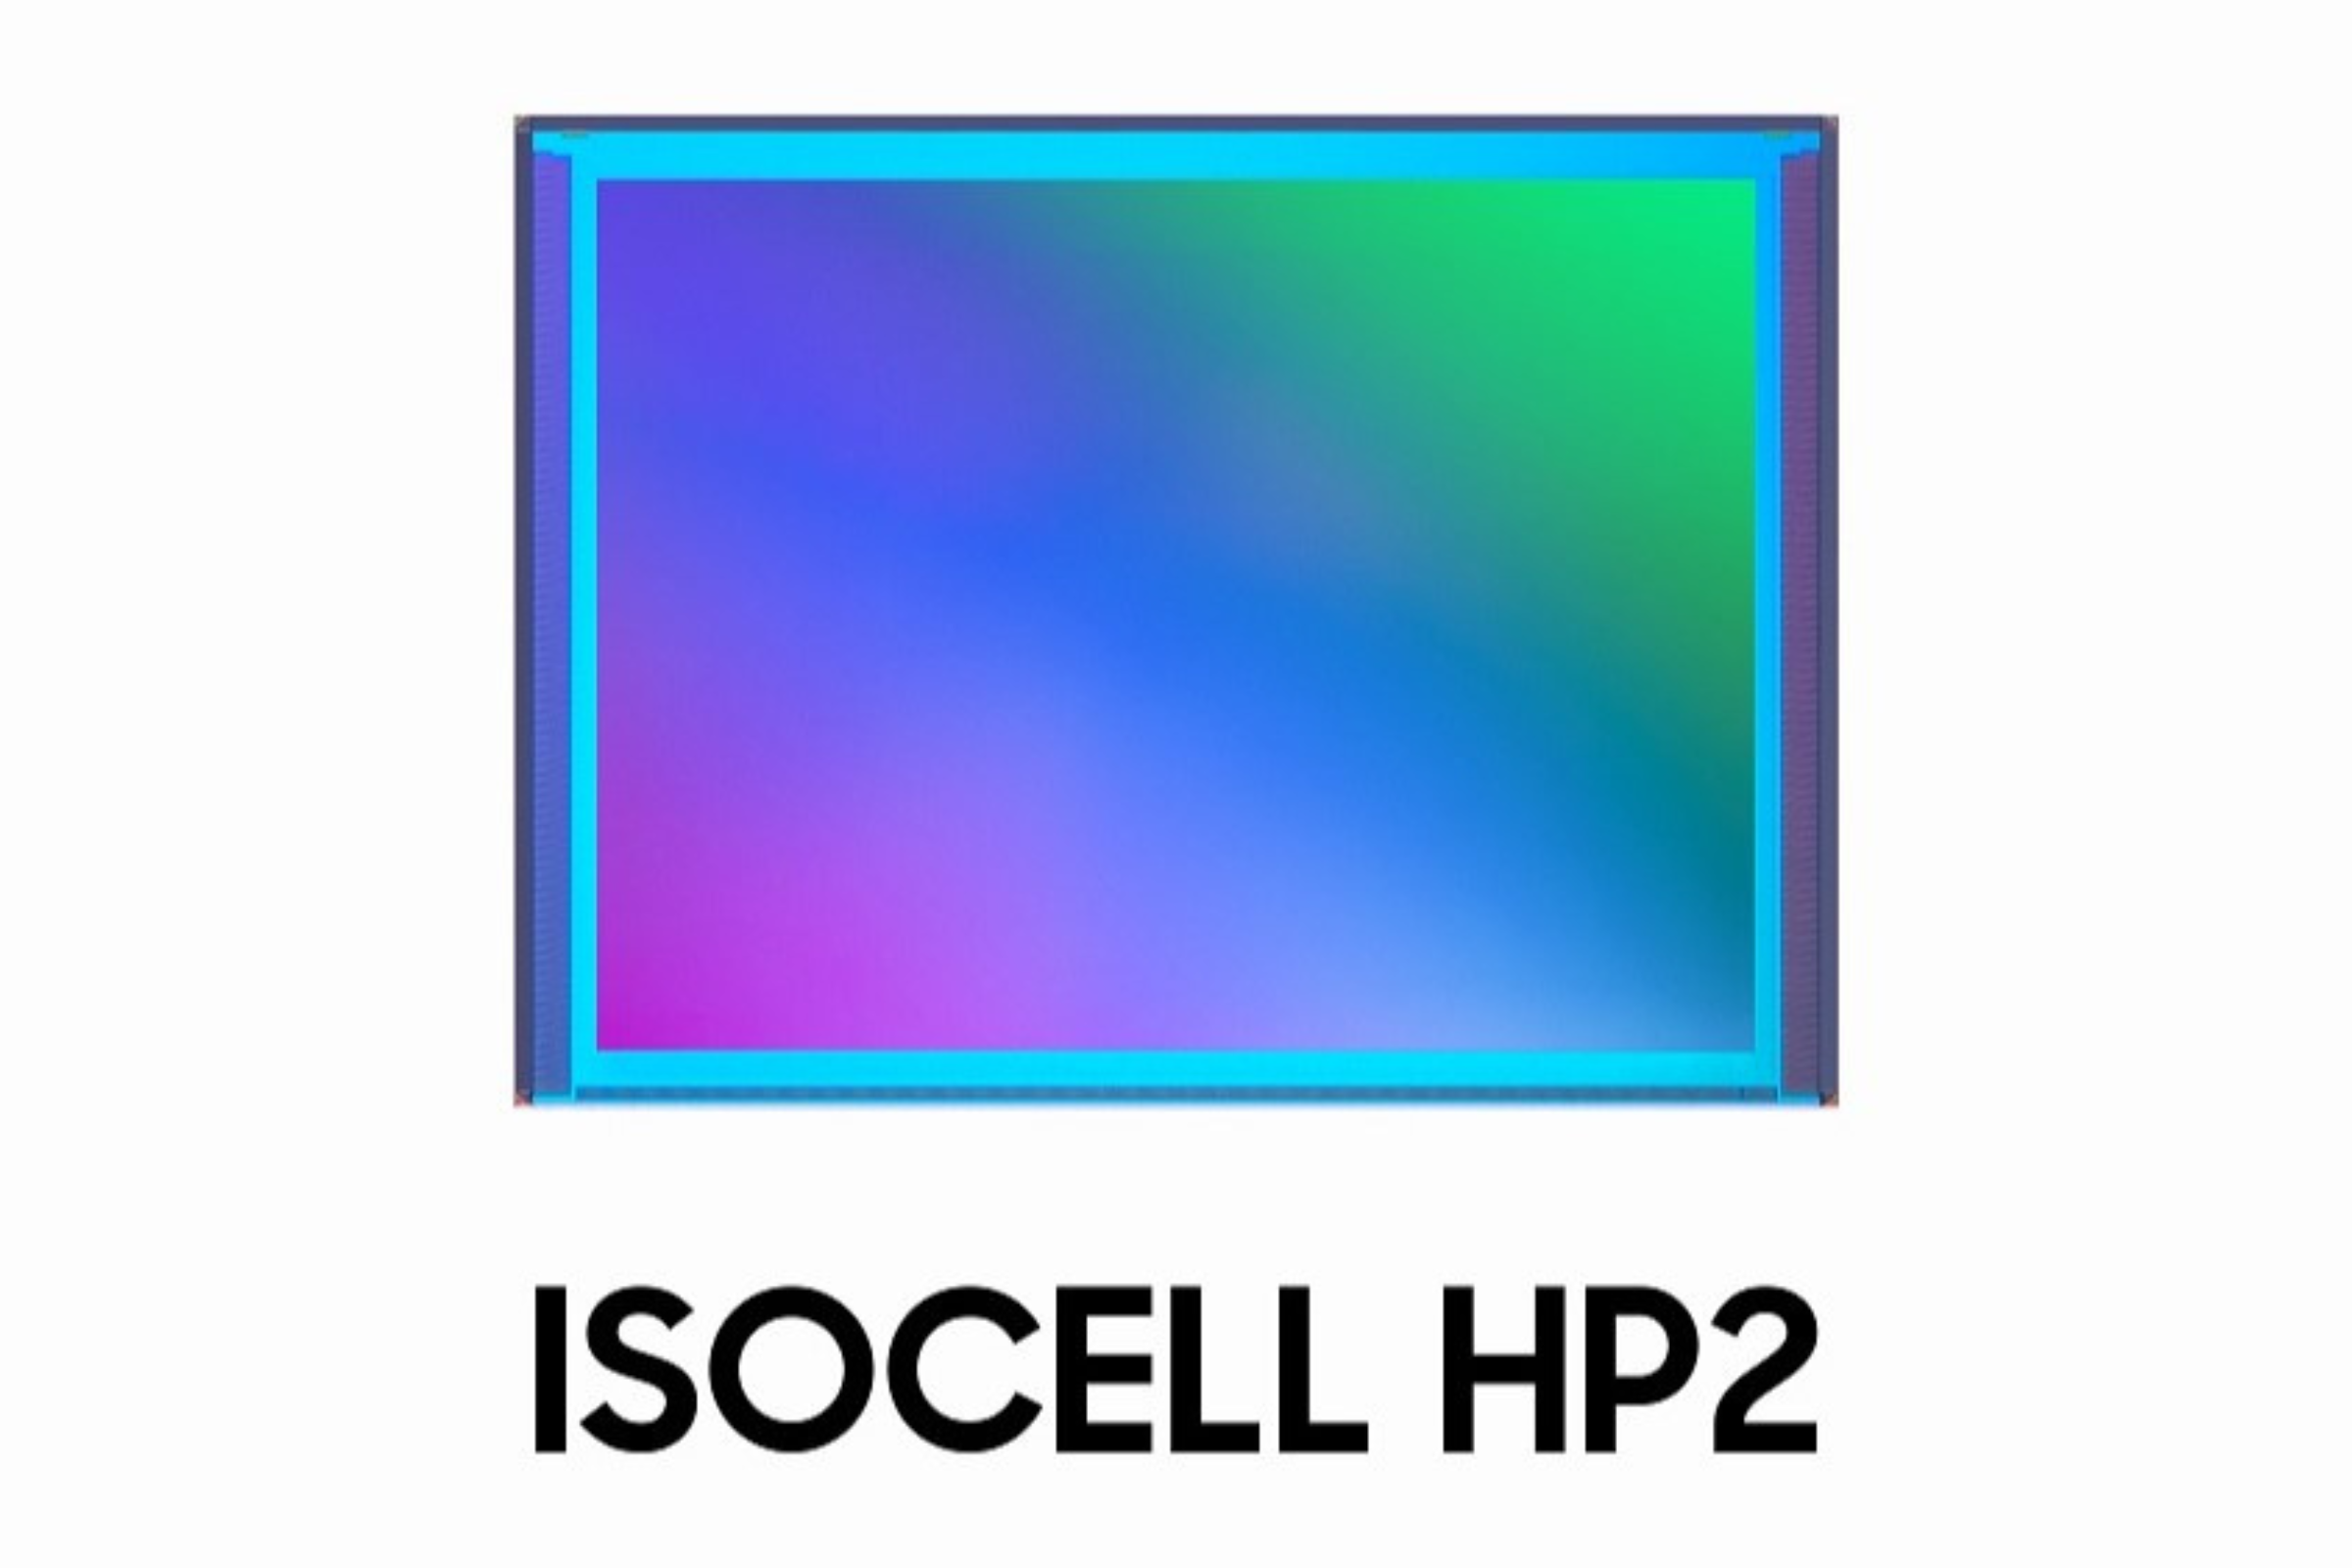 Samsung announces 200MP ISOCELL HP2 image sensor that could debut in the Galaxy S23 Ultra